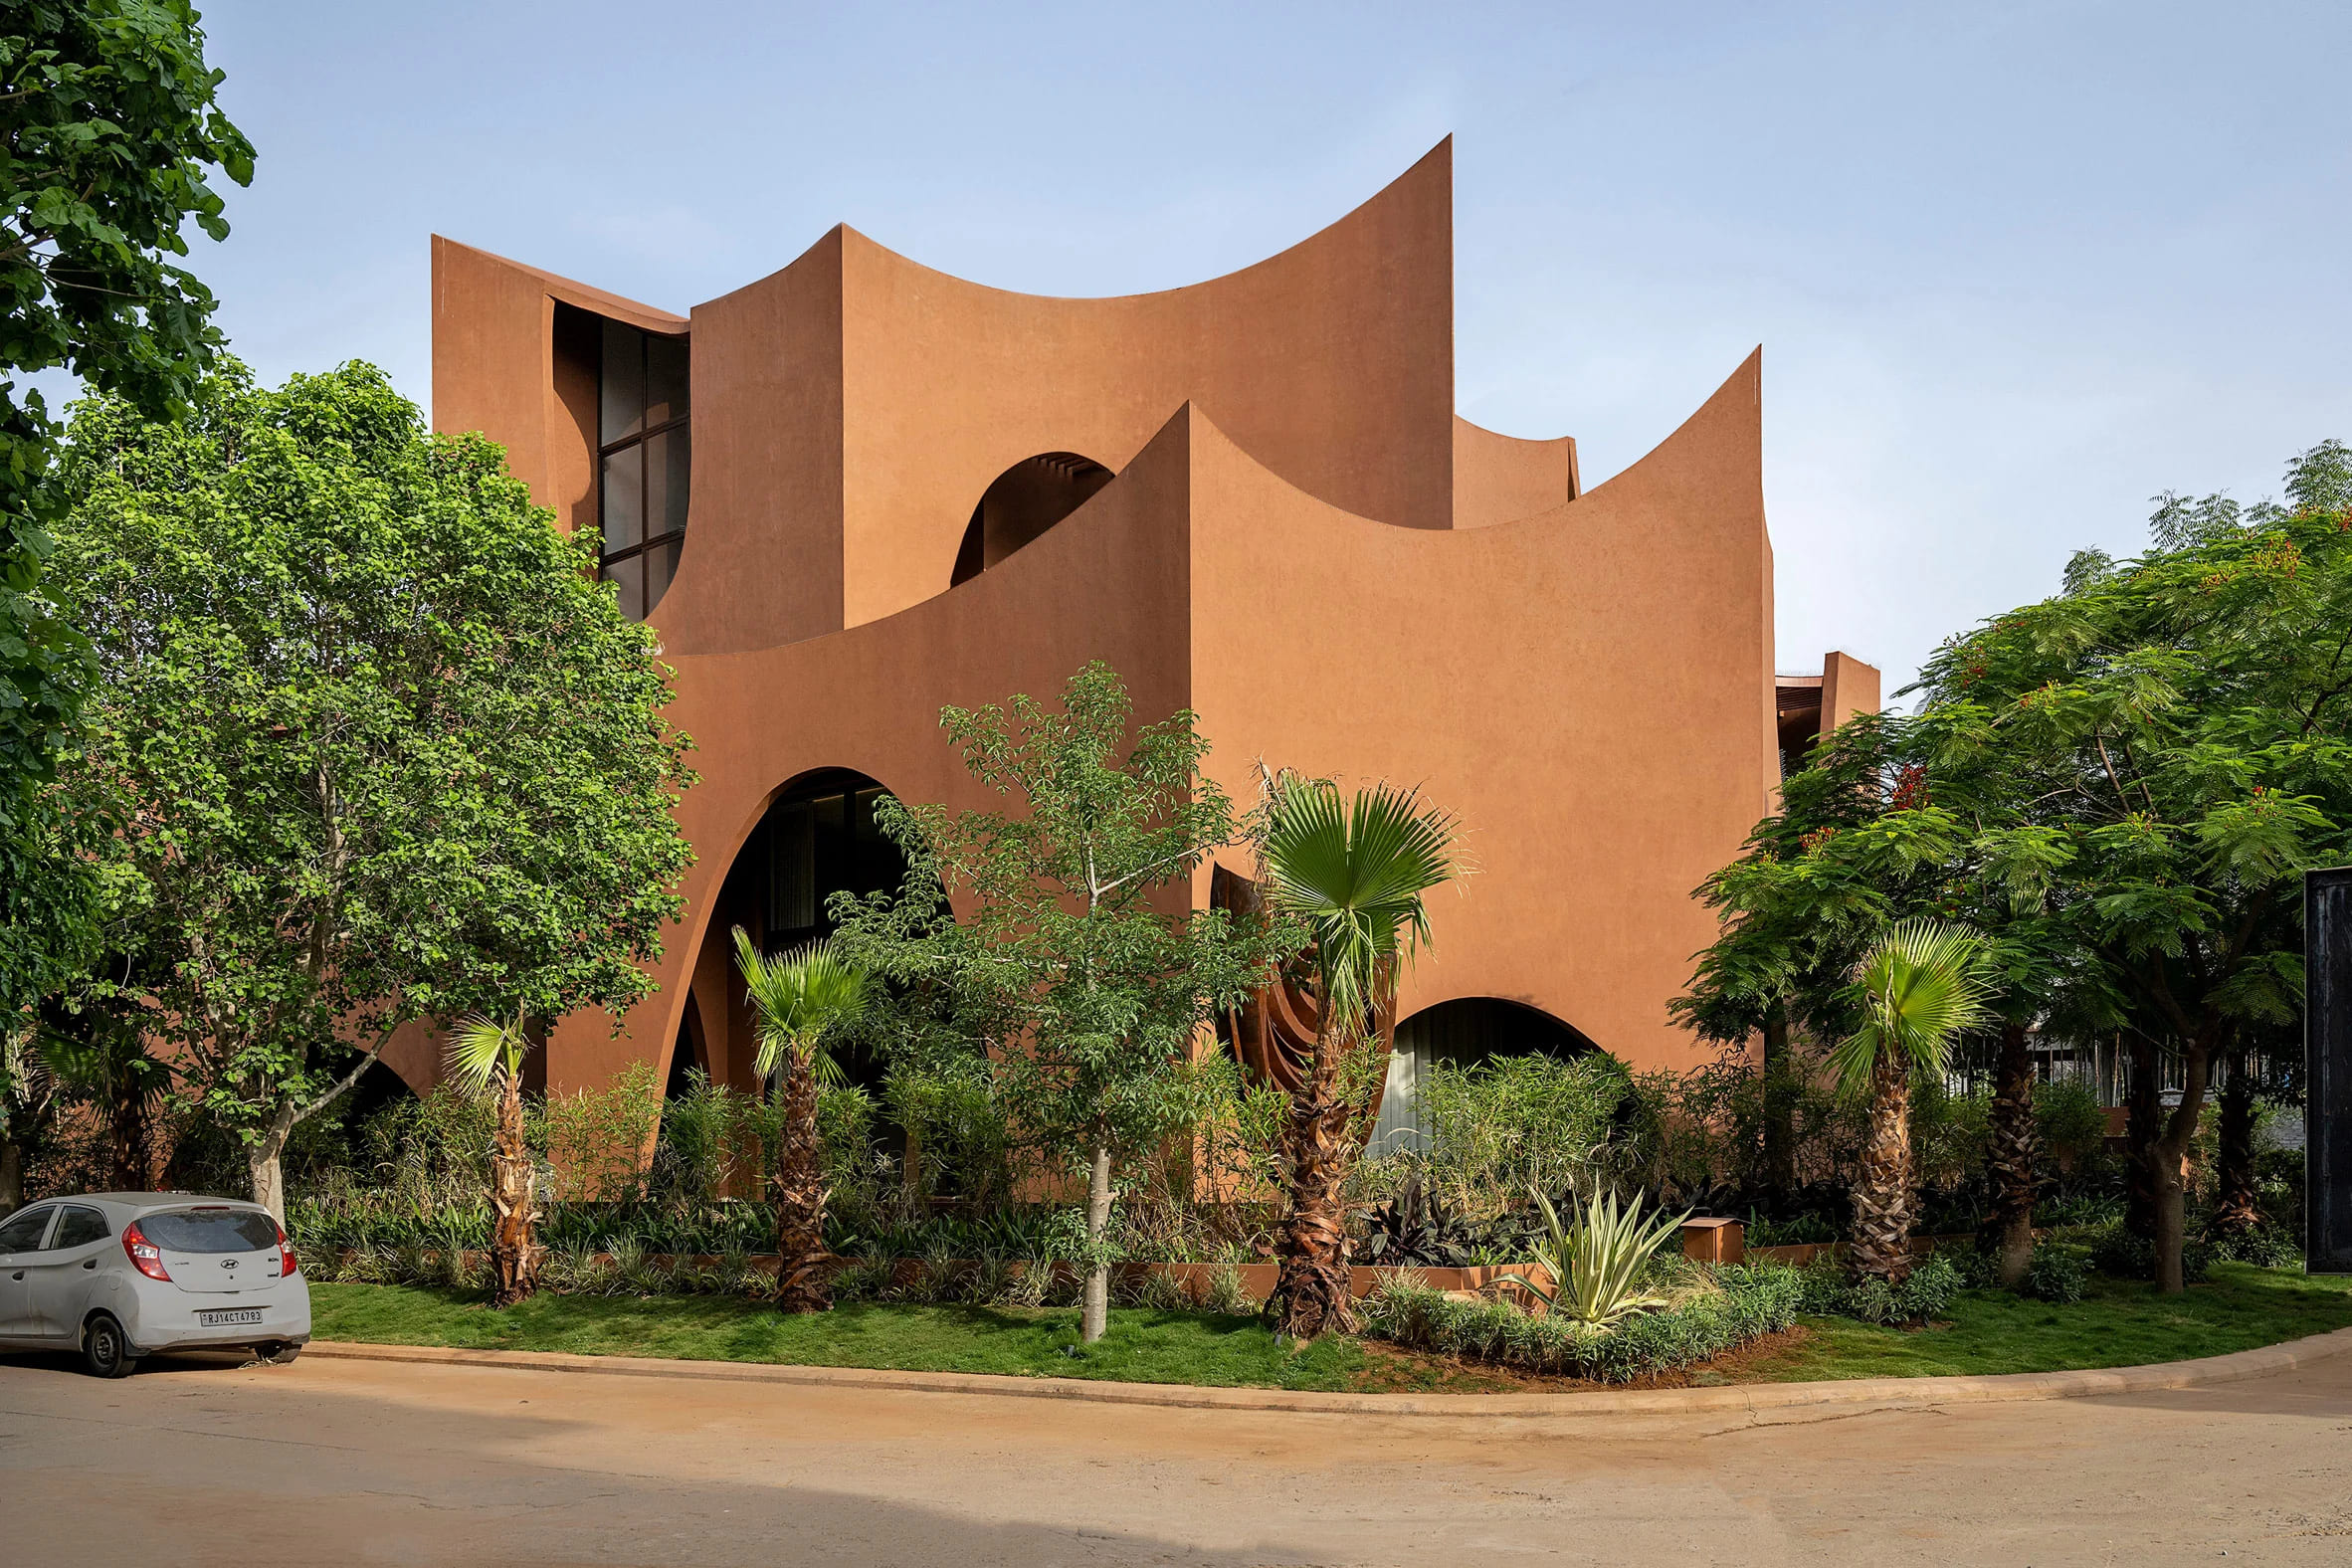 Mirai House of Arches looks very shabby due to its scalloped walls which are full of arches